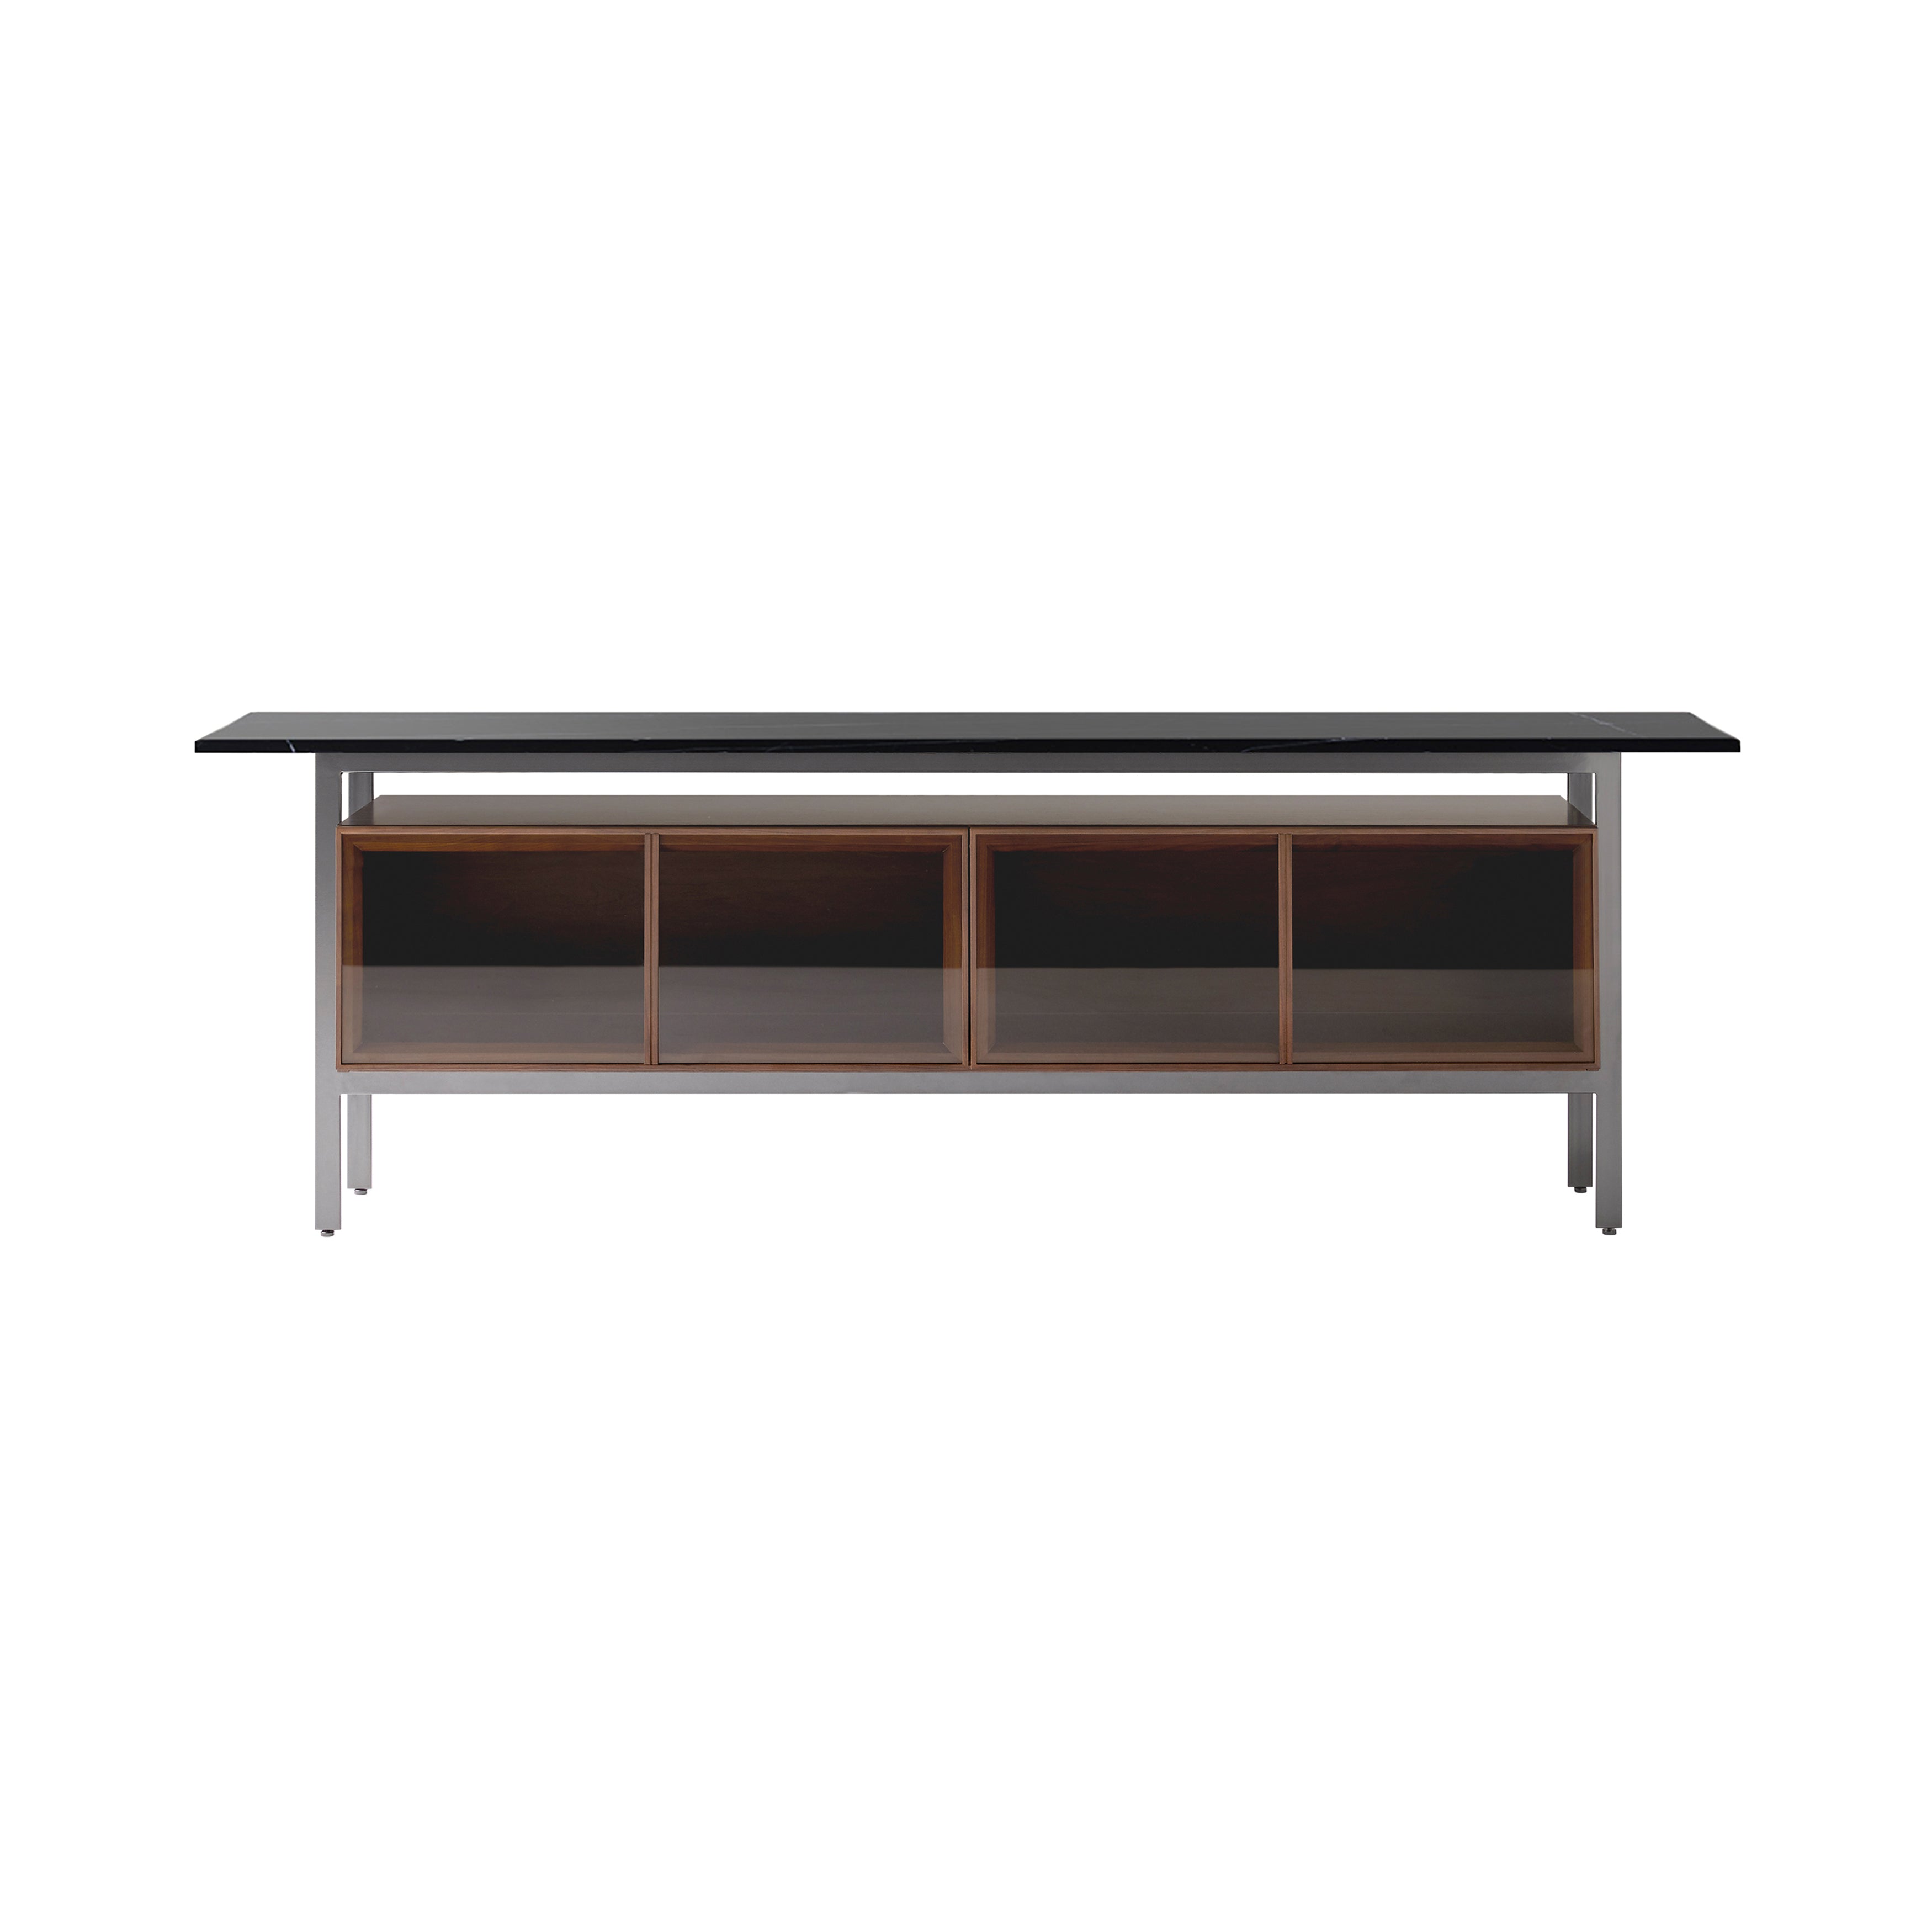 Chicago Glass Door Sideboard: Small + Silestone Marquina + Walnut Stained Oak + Black Nickel